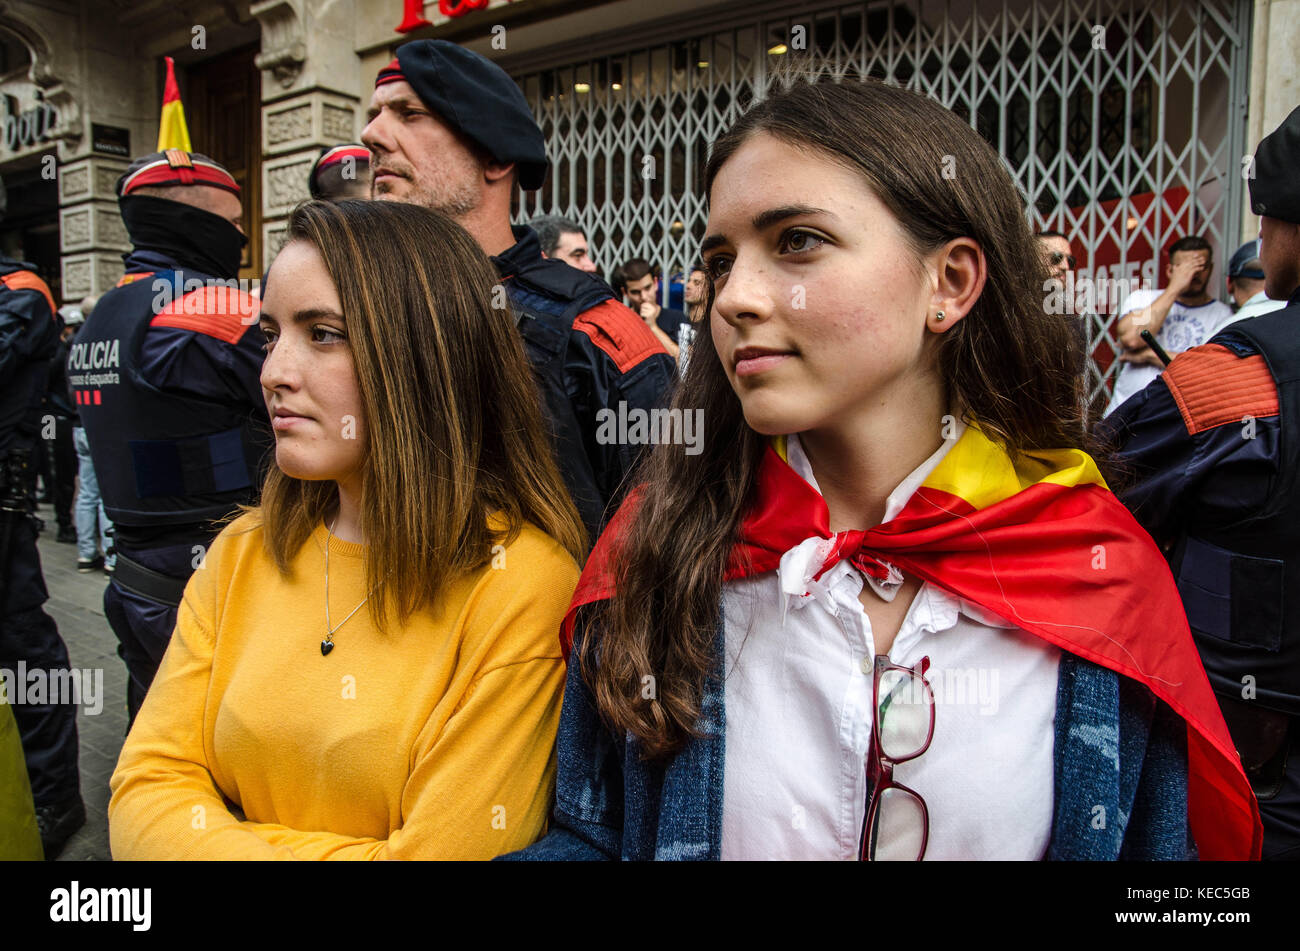 Barcelona, Catalonia, Spain. 12th Oct, 2017. Two young girls are interposed between the Catalan local police and the crowd that is shouting them.Hispanic Heritage Day is being celebrated across Spain. Loyalist organizations urged thousands of citizens have taken to the streets of Barcelona to reaffirm their Spanish national identity and to reject the Catalan sovereignty process. At the end of the rally some protesters have insulted the local police who were making checks to troublemakers. Credit: Copyright Paco Freire/SOPA/ZUMA Wire/Alamy Live News Stock Photo